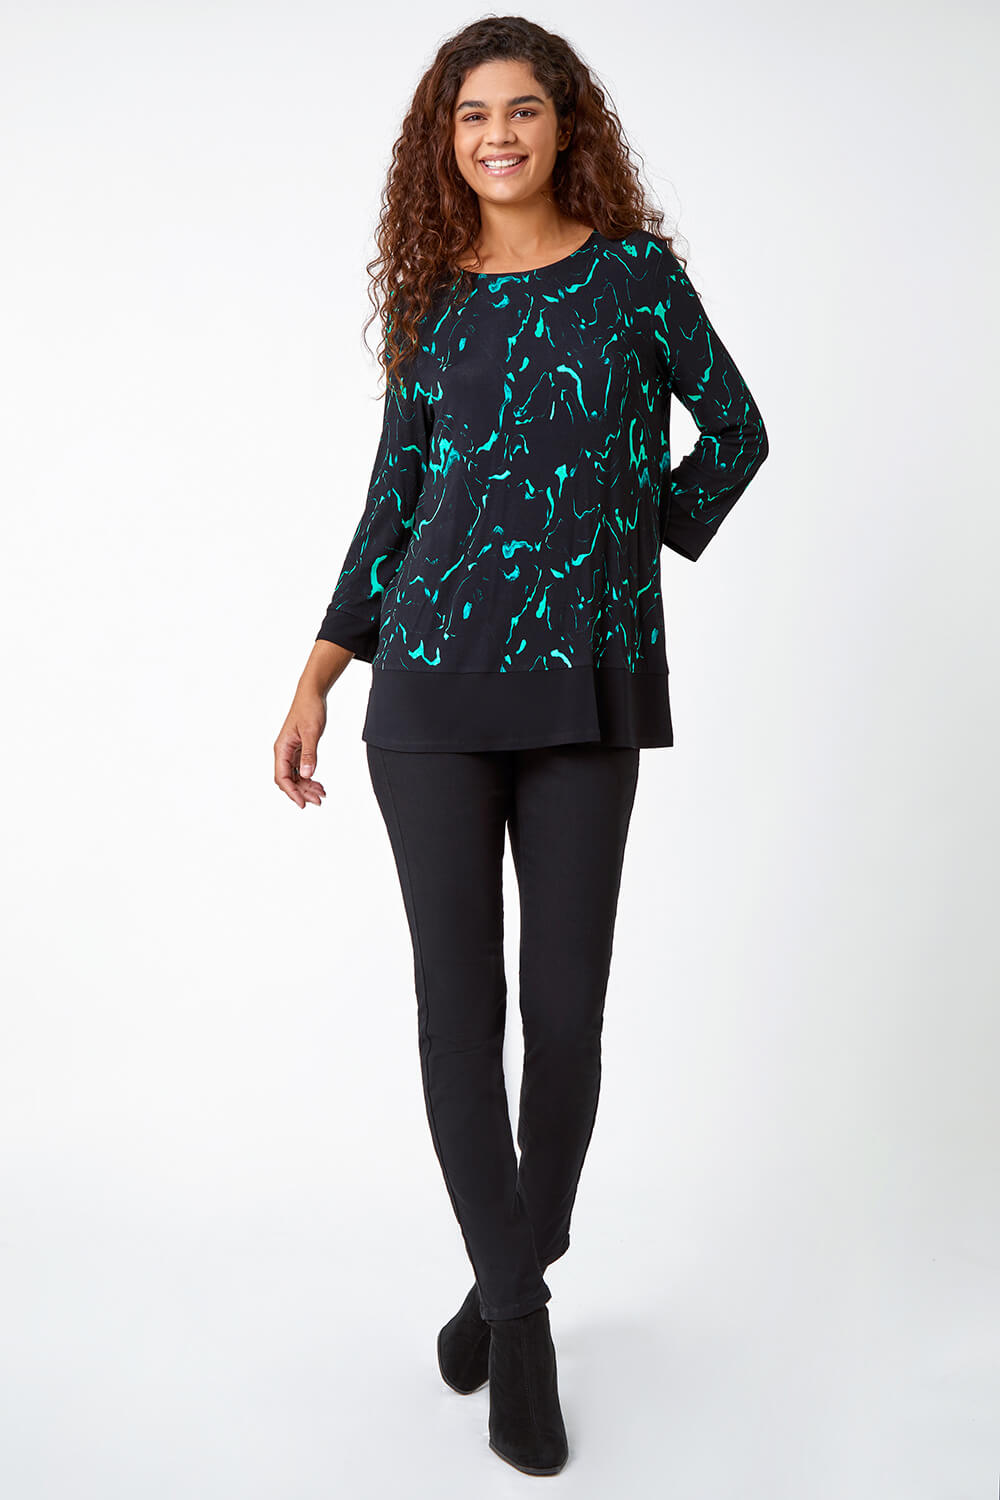 Green Marble Print Contrast Hem Stretch Top, Image 2 of 5